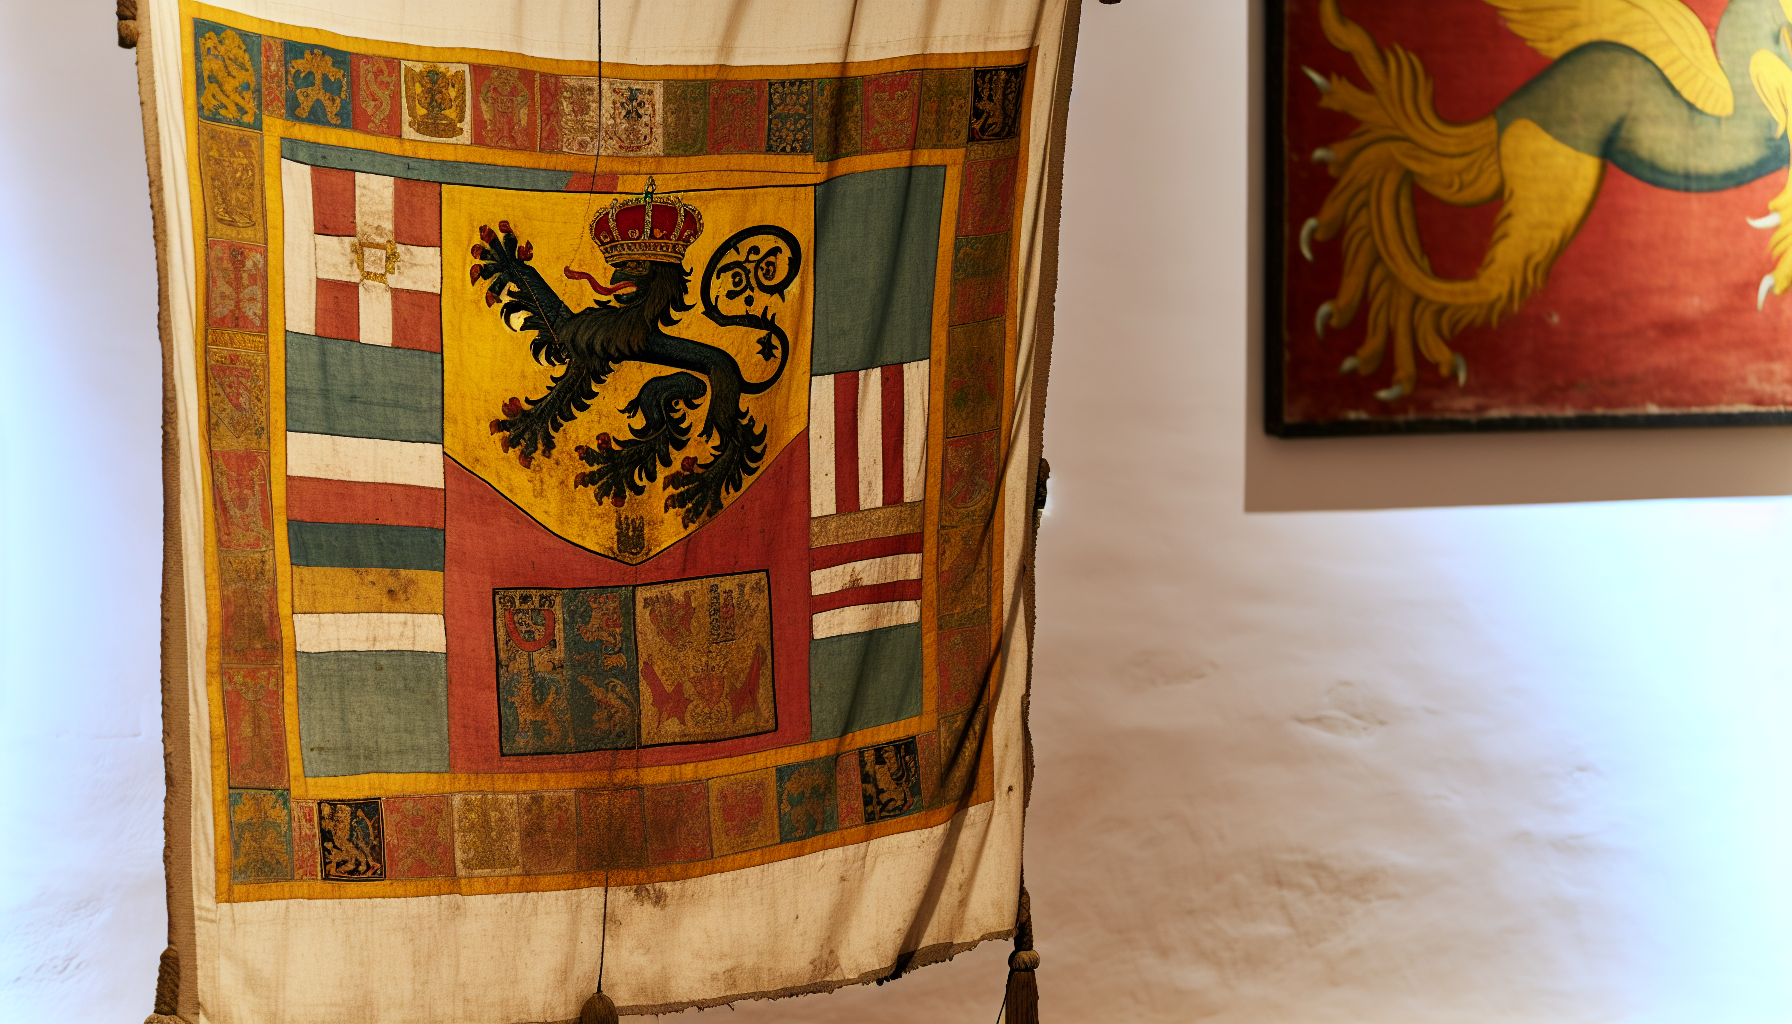 Territorial flag with coat of arms